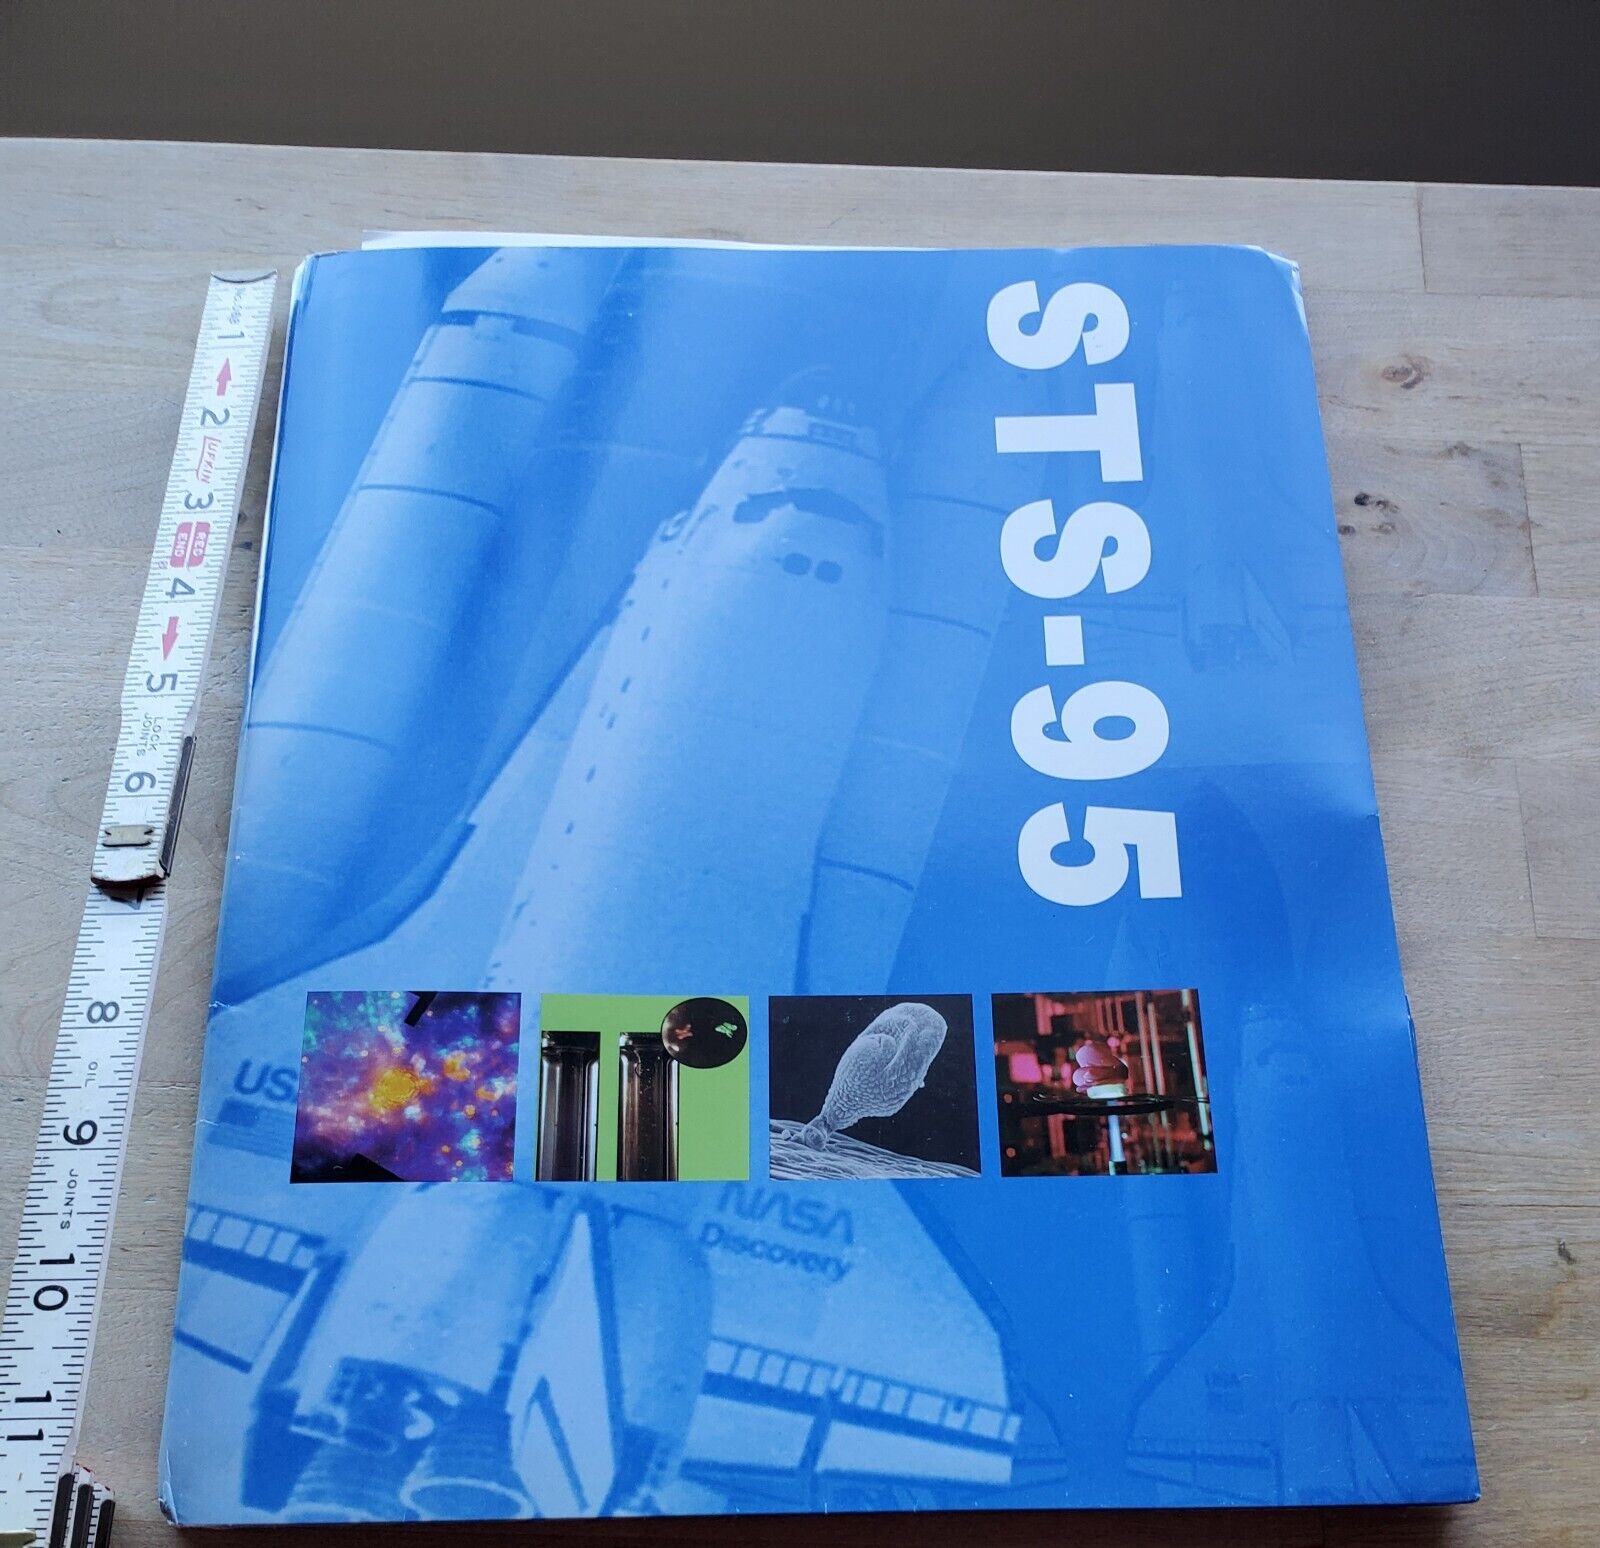 SPACE SHUTTLE STS-95 PAYLOAD INFORMATION KIT: G-